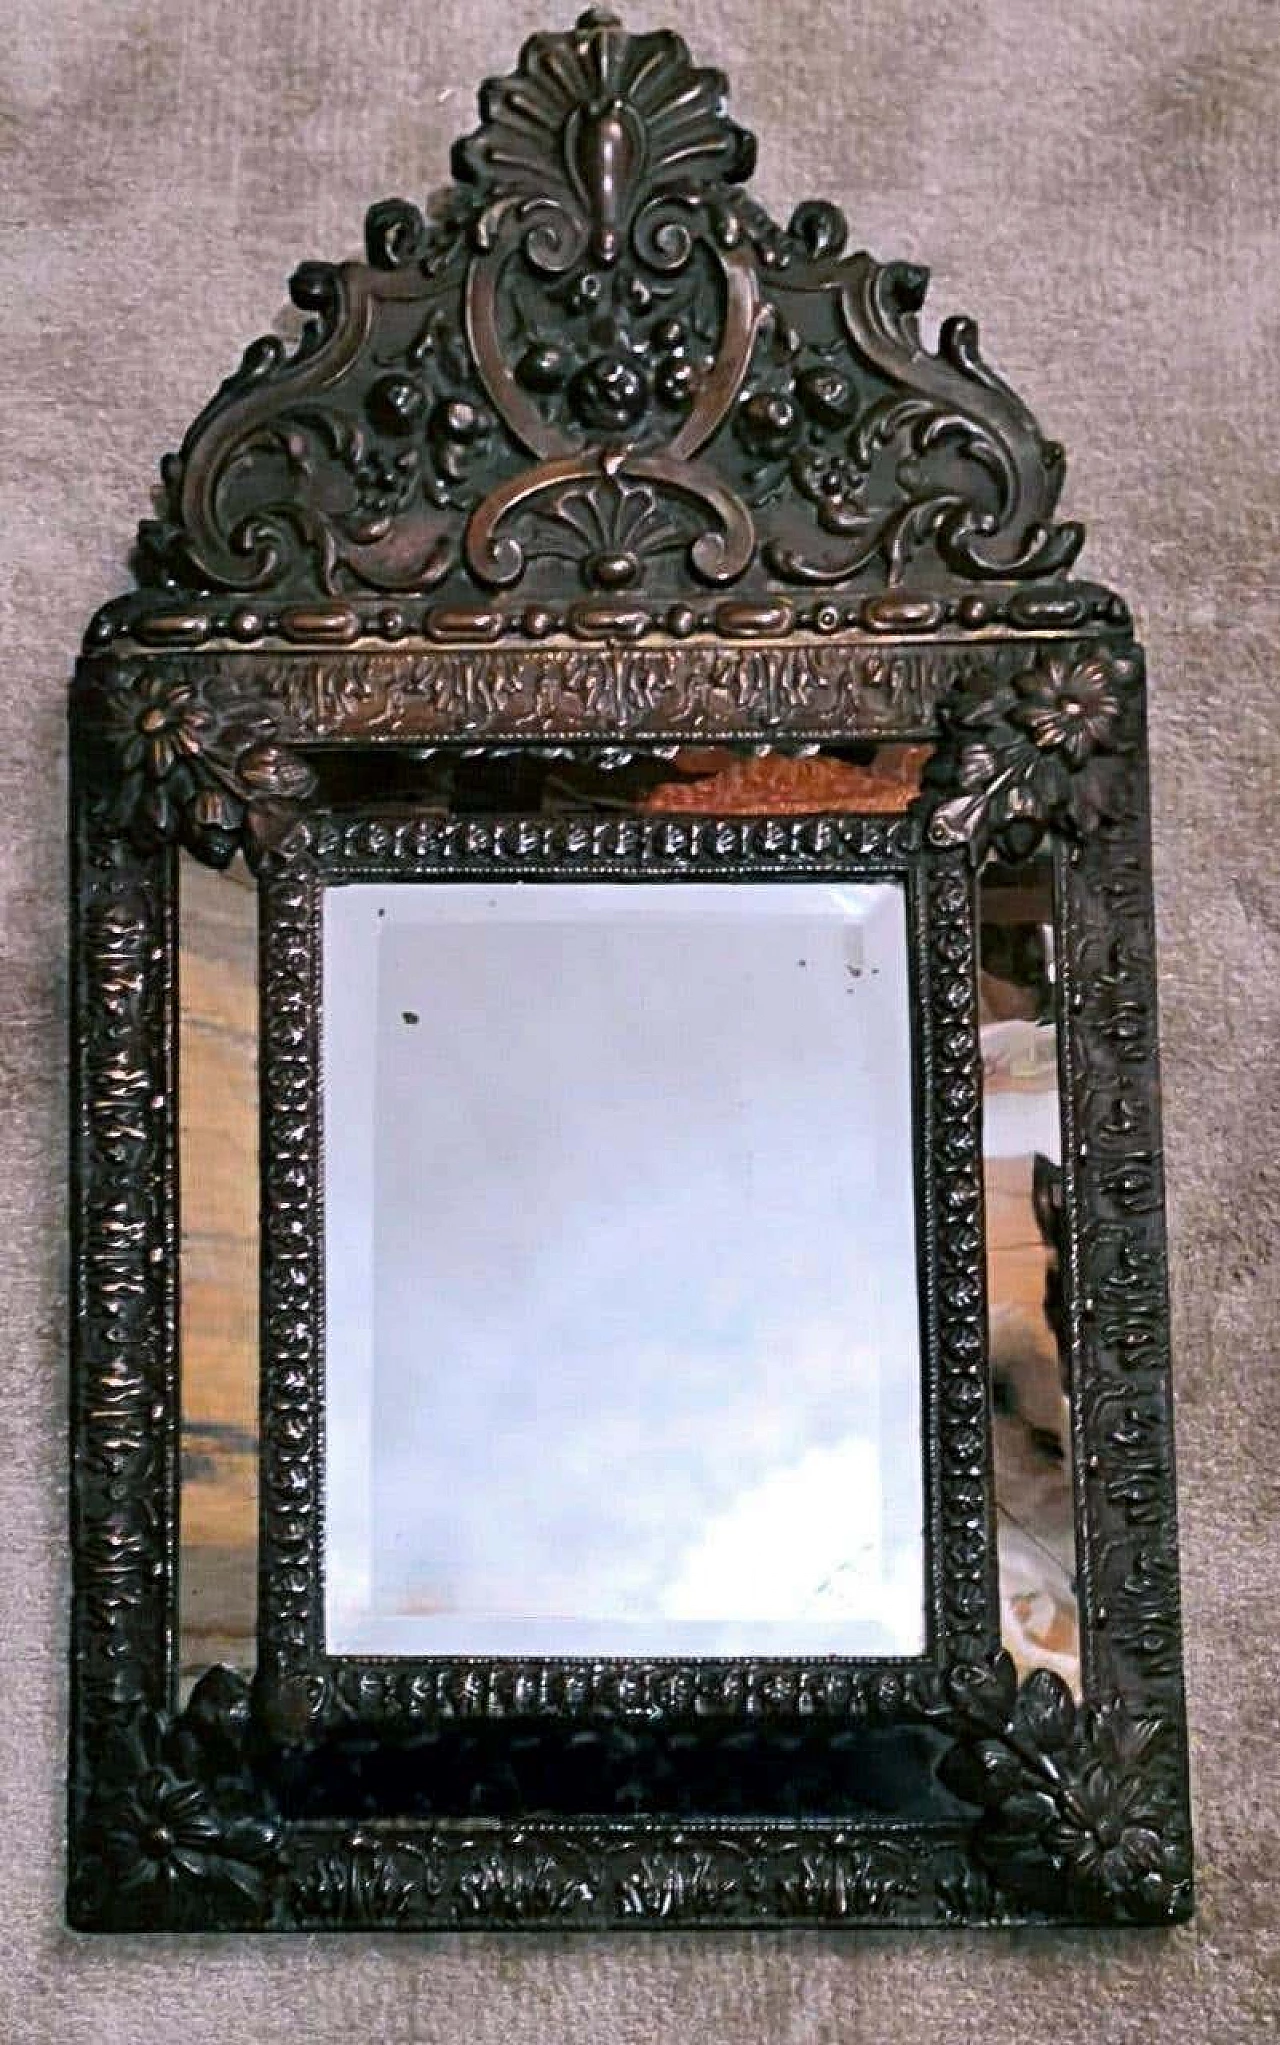 Napoleon III style wall mirror with repoussé work in burnished brass, mid-19th century 4